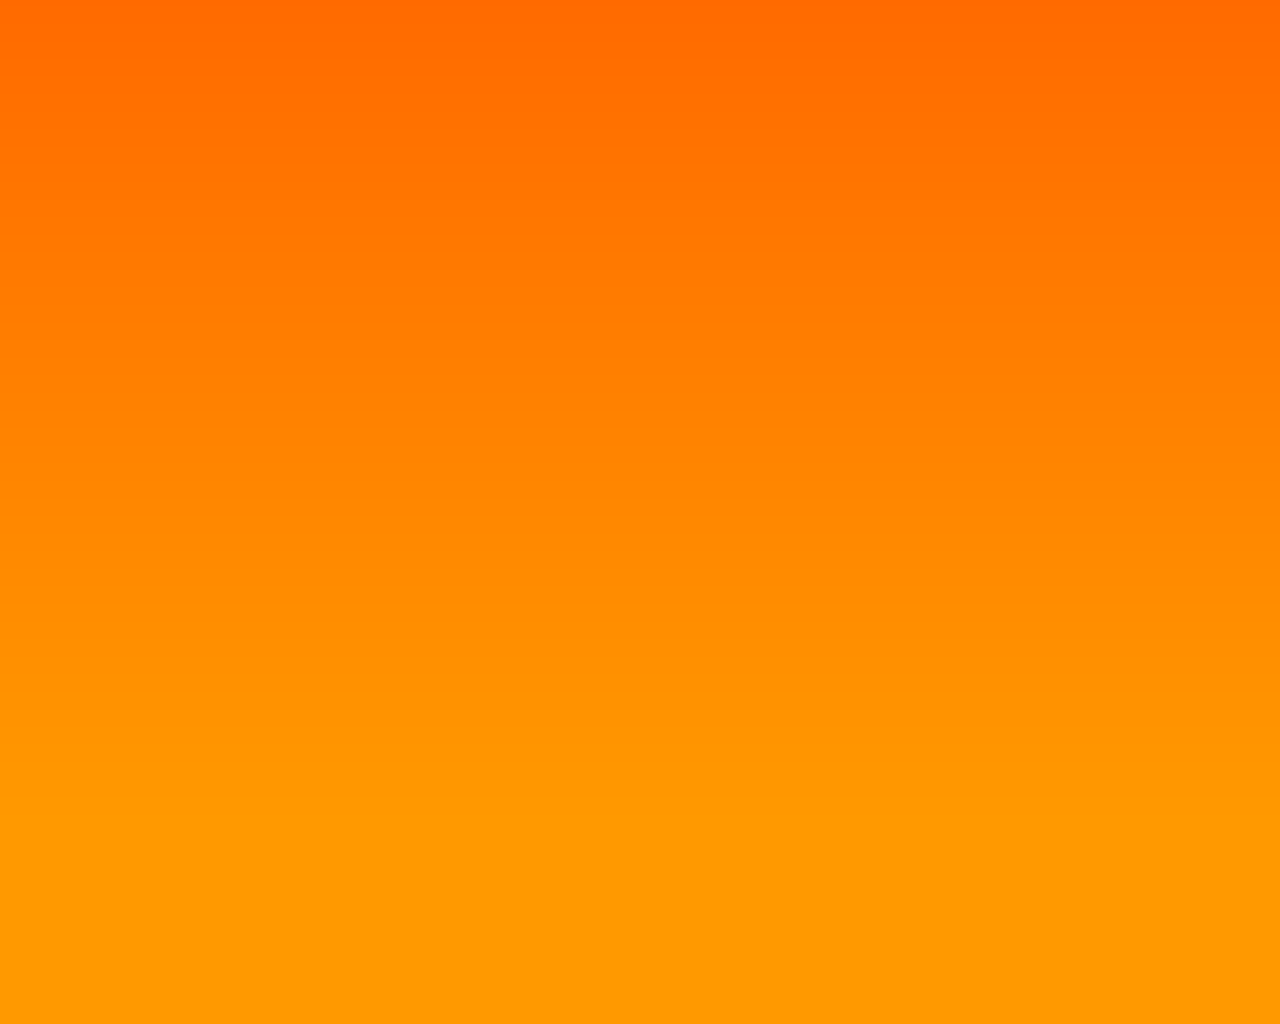 A red and orange background with an airplane flying in the sky - Neon orange